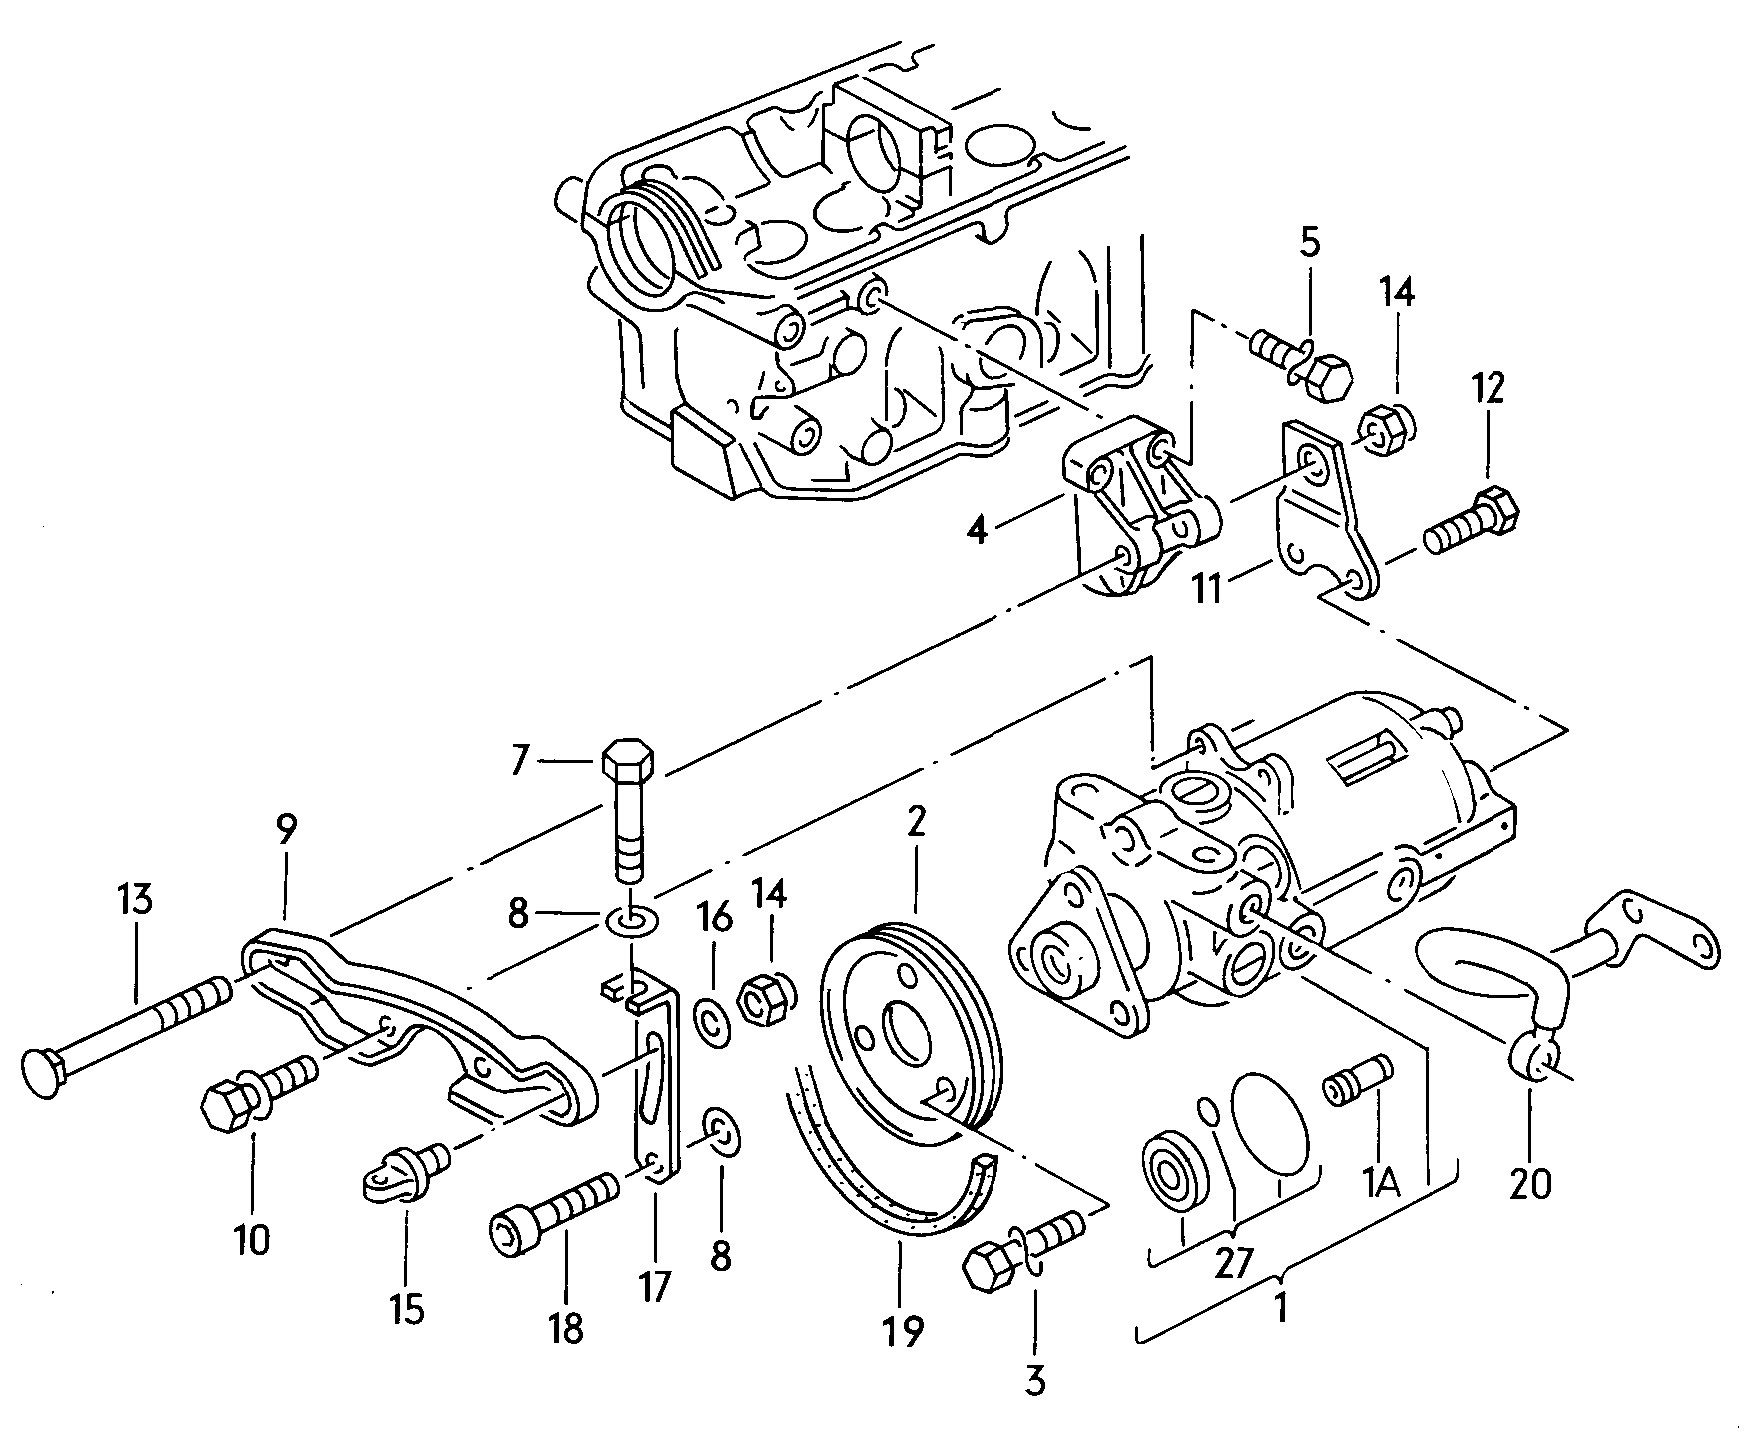 central hydraulic pumpfor power steering  - Audi 100 - a10